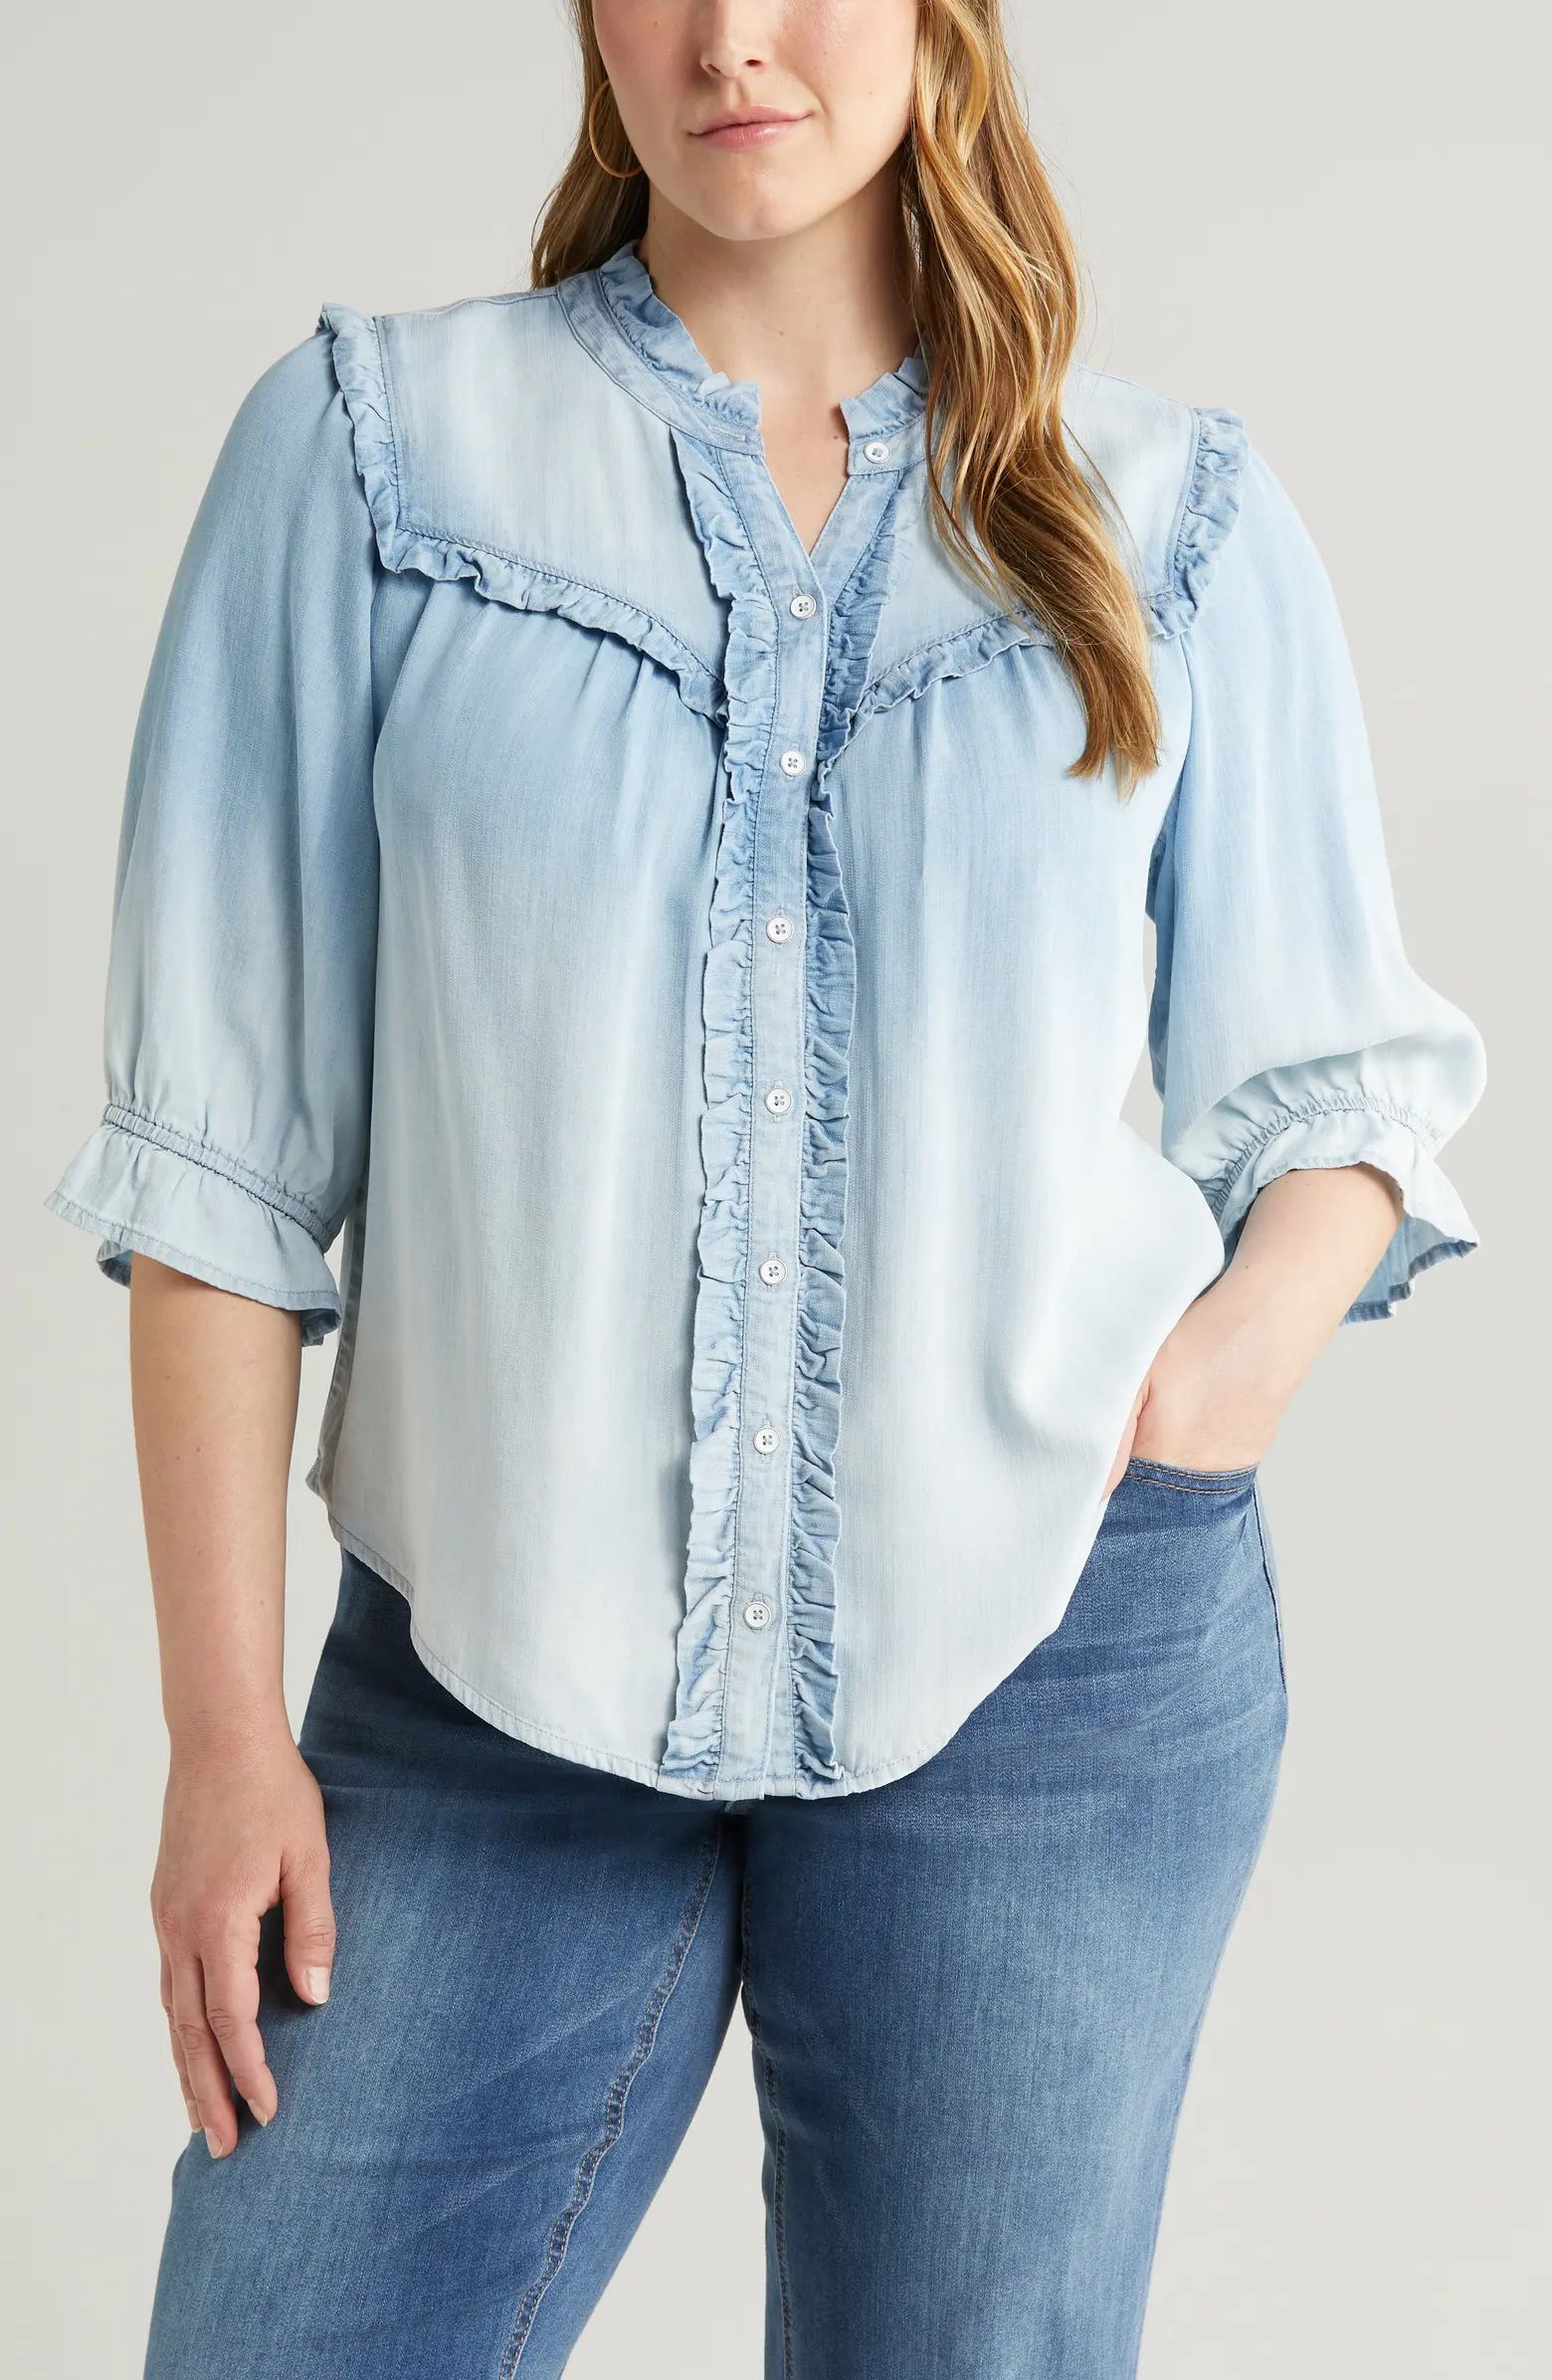 Wit & Wisdom Ruffle Trim Chambray Button-Up Top | Nordstrom | Nordstrom